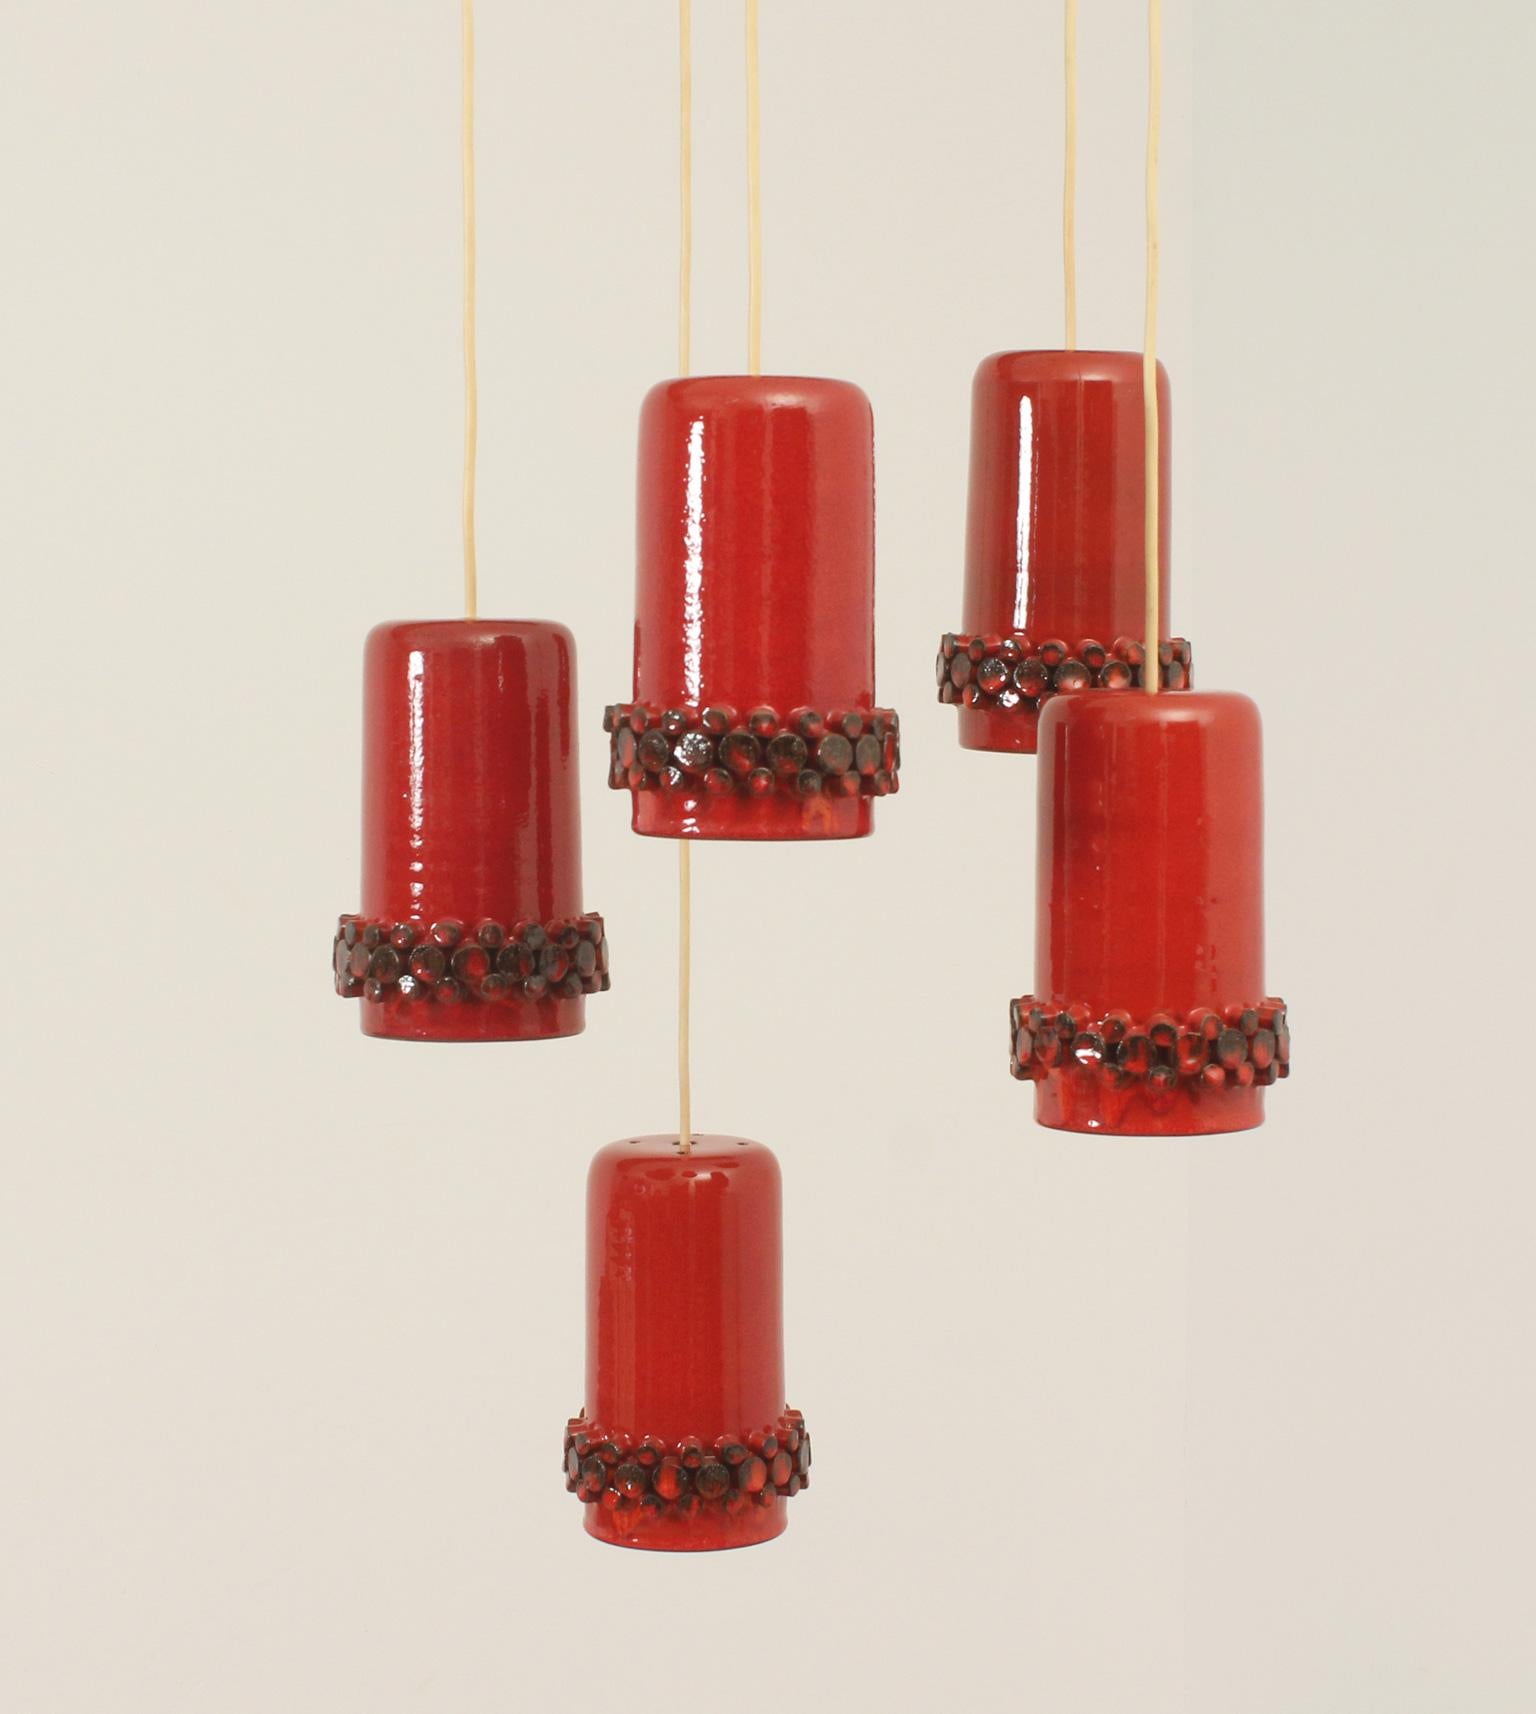 Cascading pendant lamp for the Ceralux series designed in 1960's by Hans Welling for Ceramano, Germany. Composed of five lamps in red glazed ceramic. 